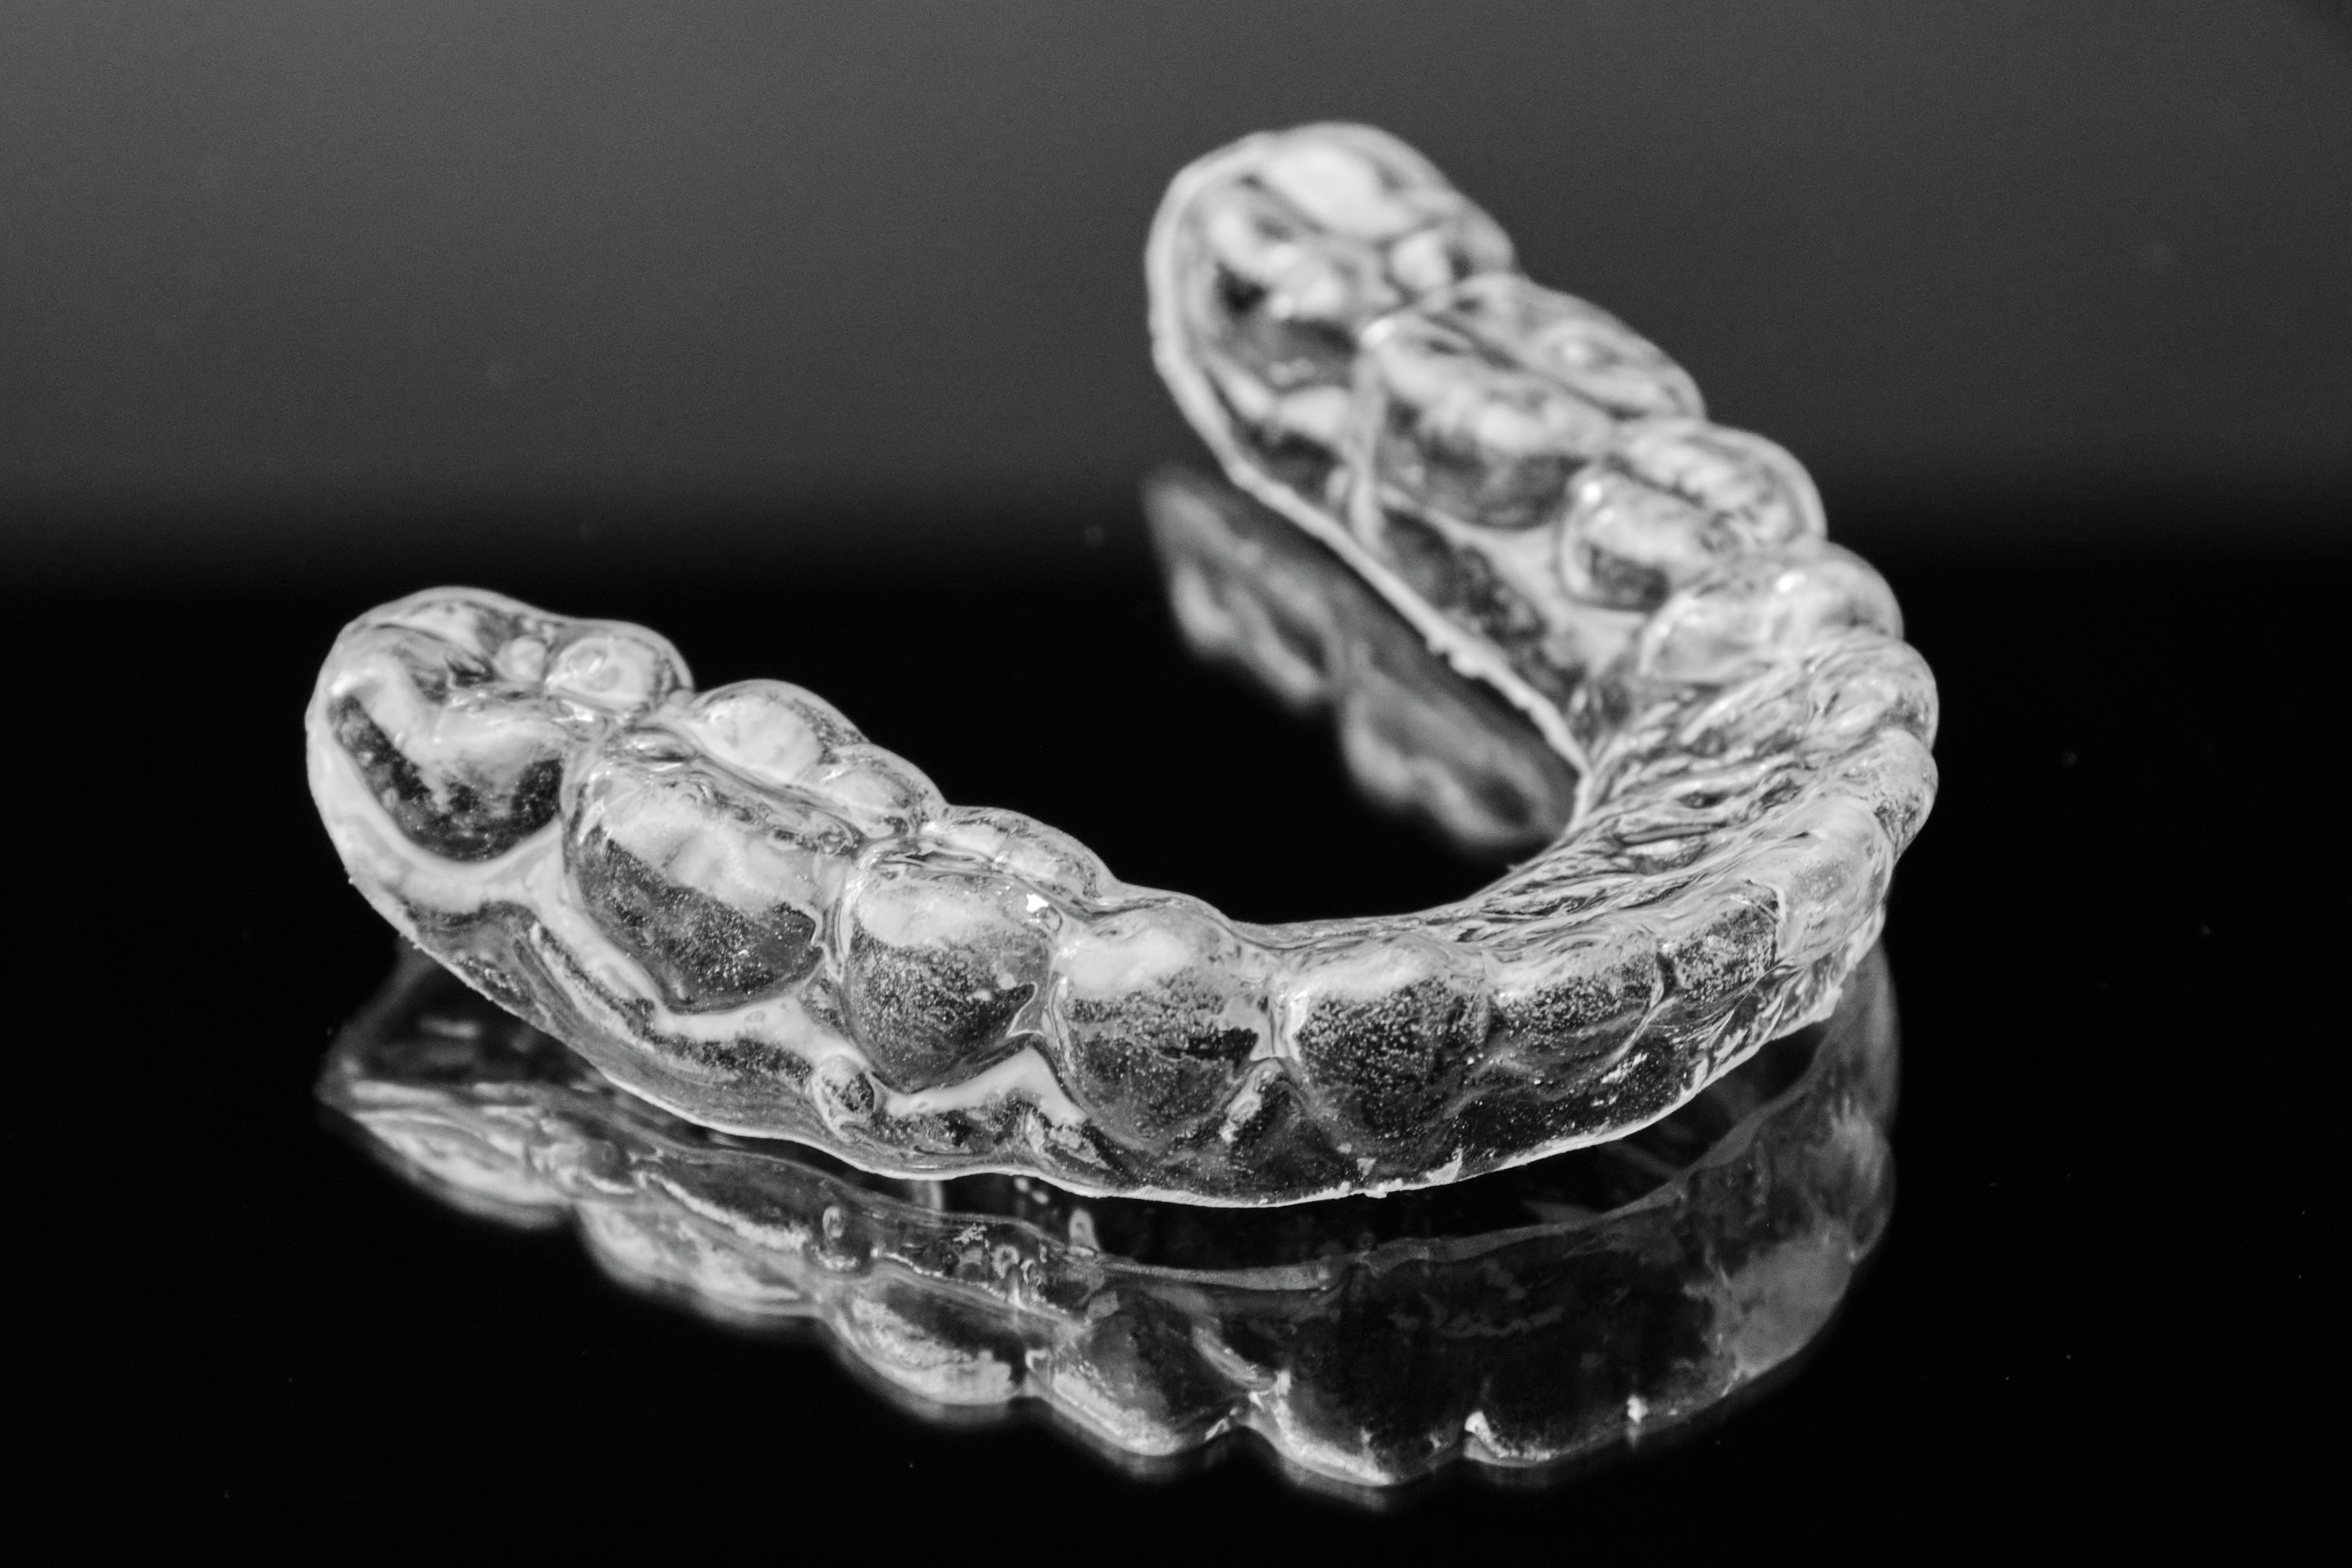 Invisible transparent dental removable braces on the black background. Orthodontic appliance for dental correction. Aligners for teeth straightening